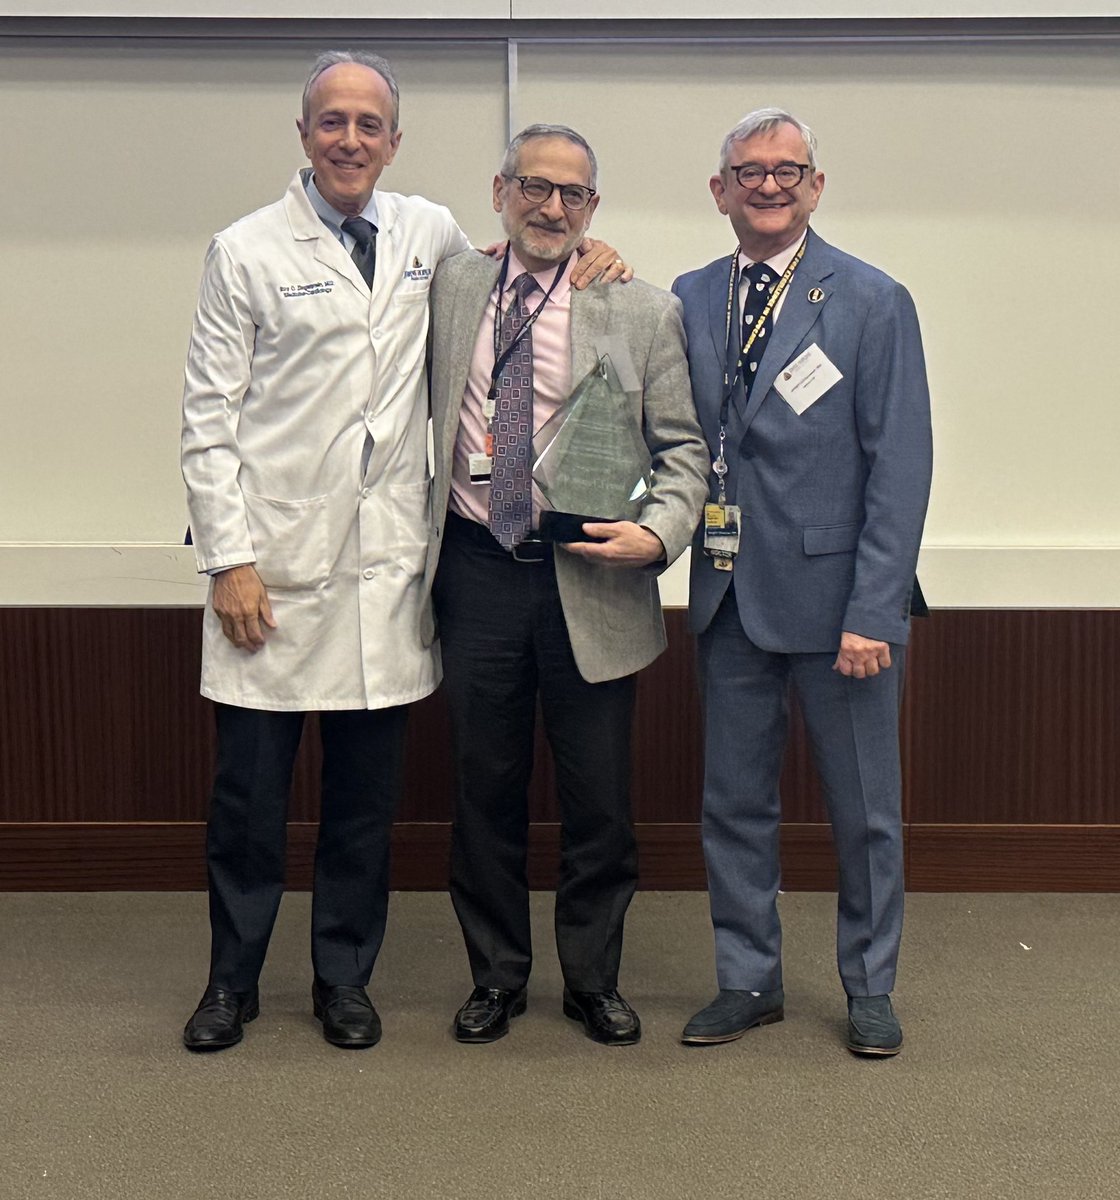 Well-deserved congratulations to Hank Fessler for receiving the highest honor from the @Hopkins_IEE as the recipient of the 2024 Martin D. Abelhoff Award for Lifetime Achievement in Medical Education and Biomedical Education